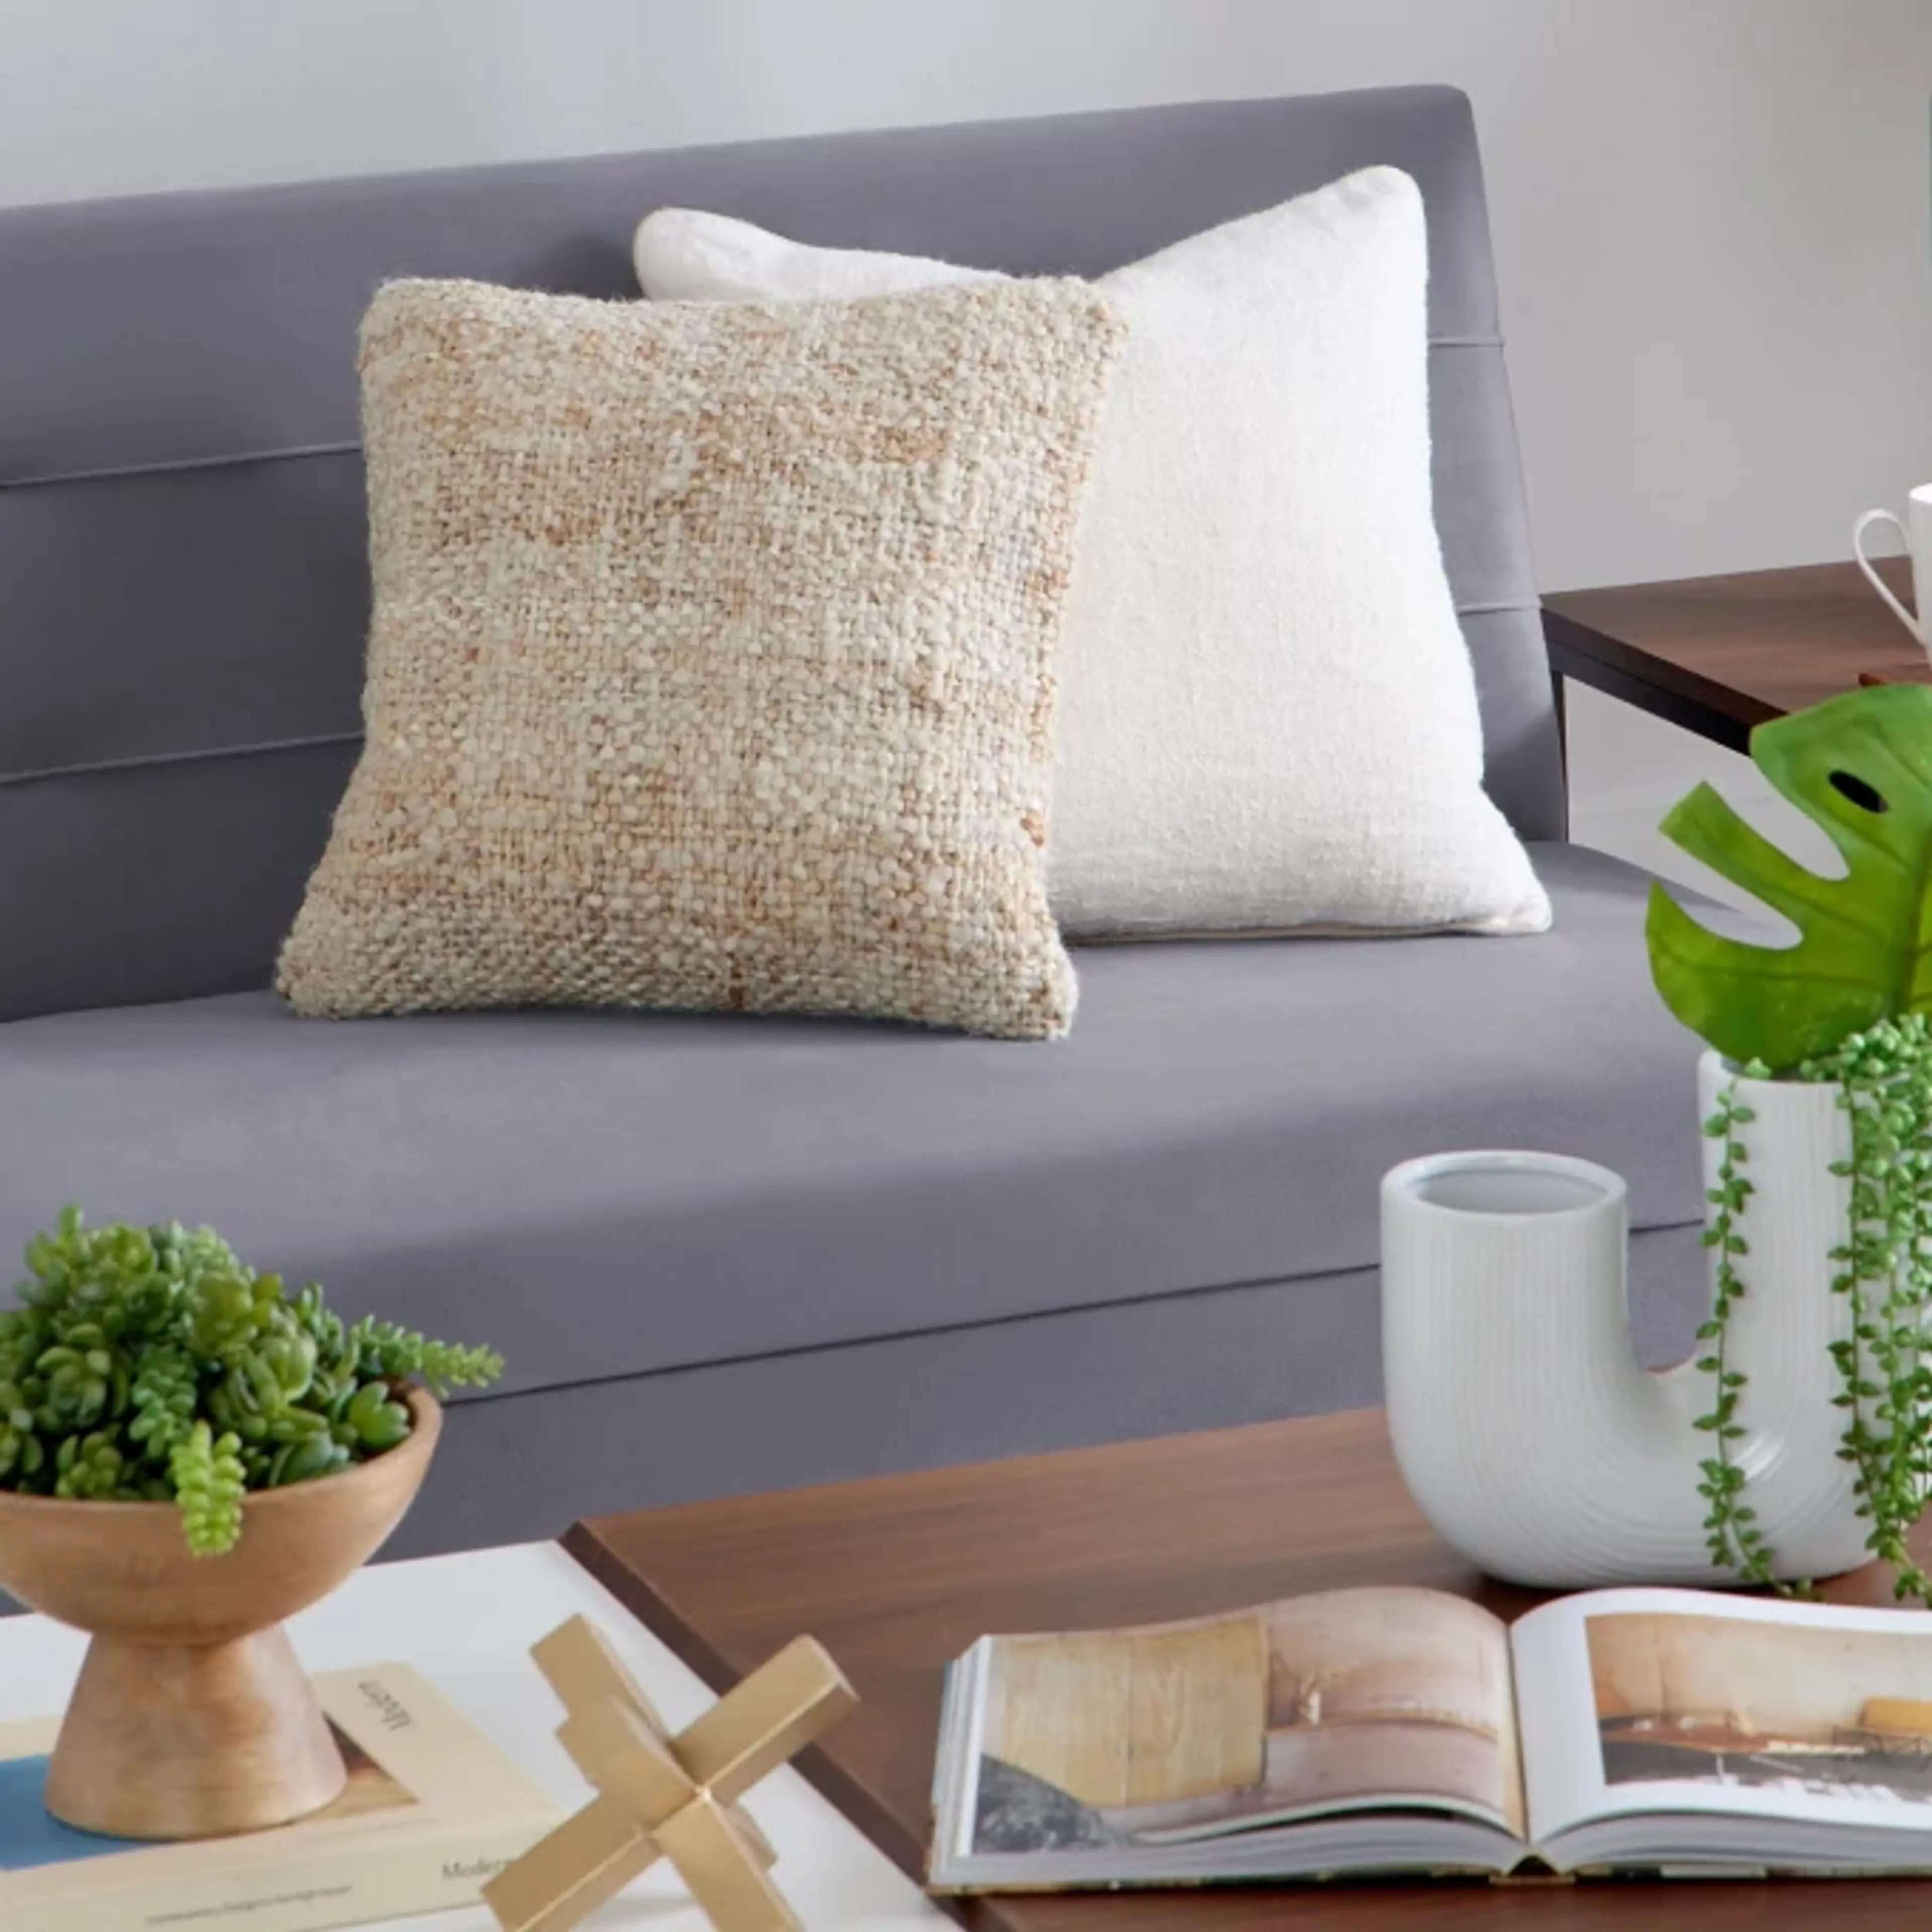 UP TO 20% OFF HOME ACCENTS*